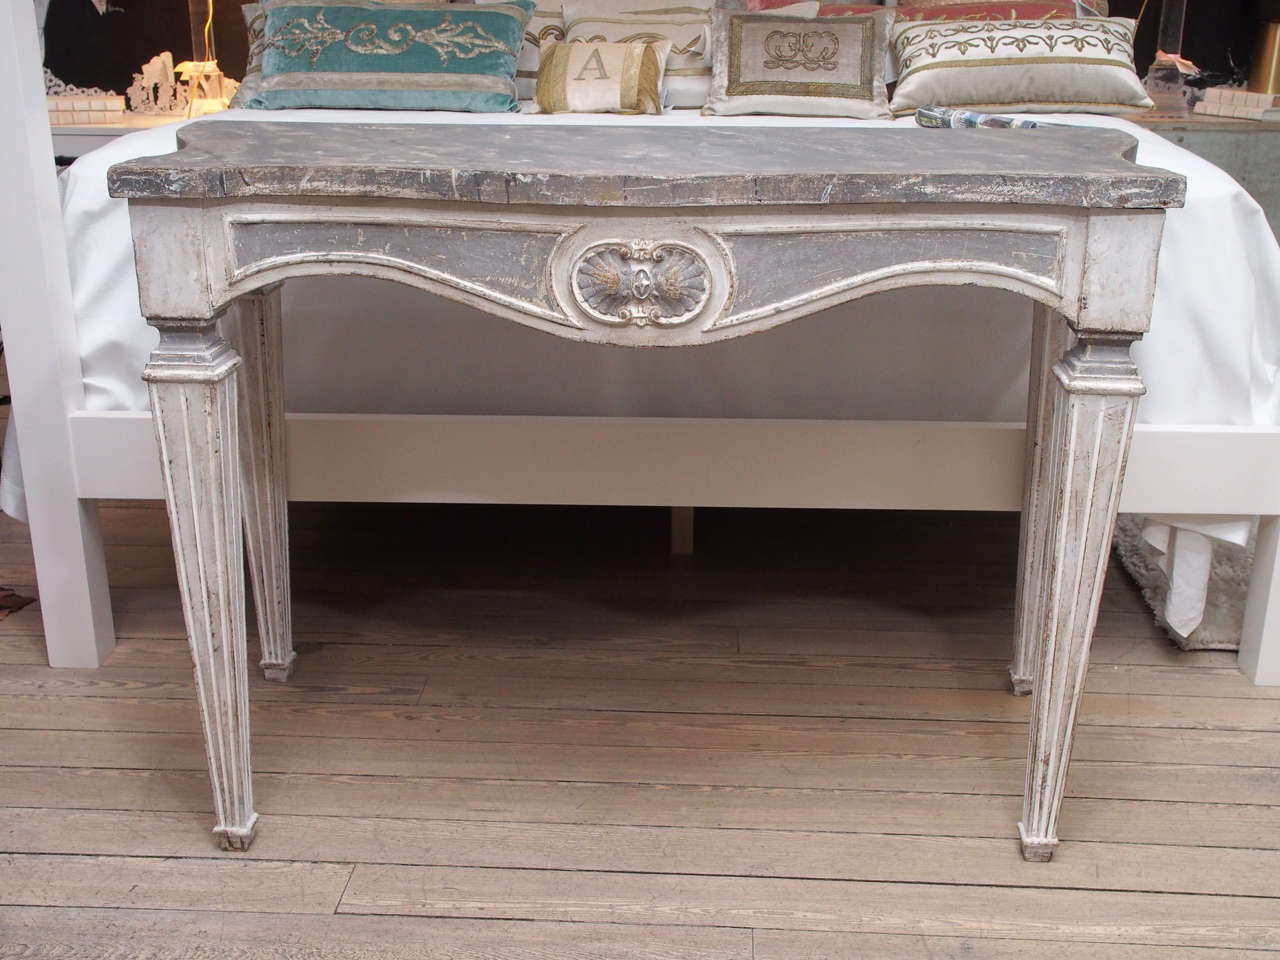 This pair of painted, wooden Italian console tables have square tapered legs that are typical of a 19th century Louis XVI period piece.  The top is painted and faux finished to look like grey marble with natural looking patches of brown, off white